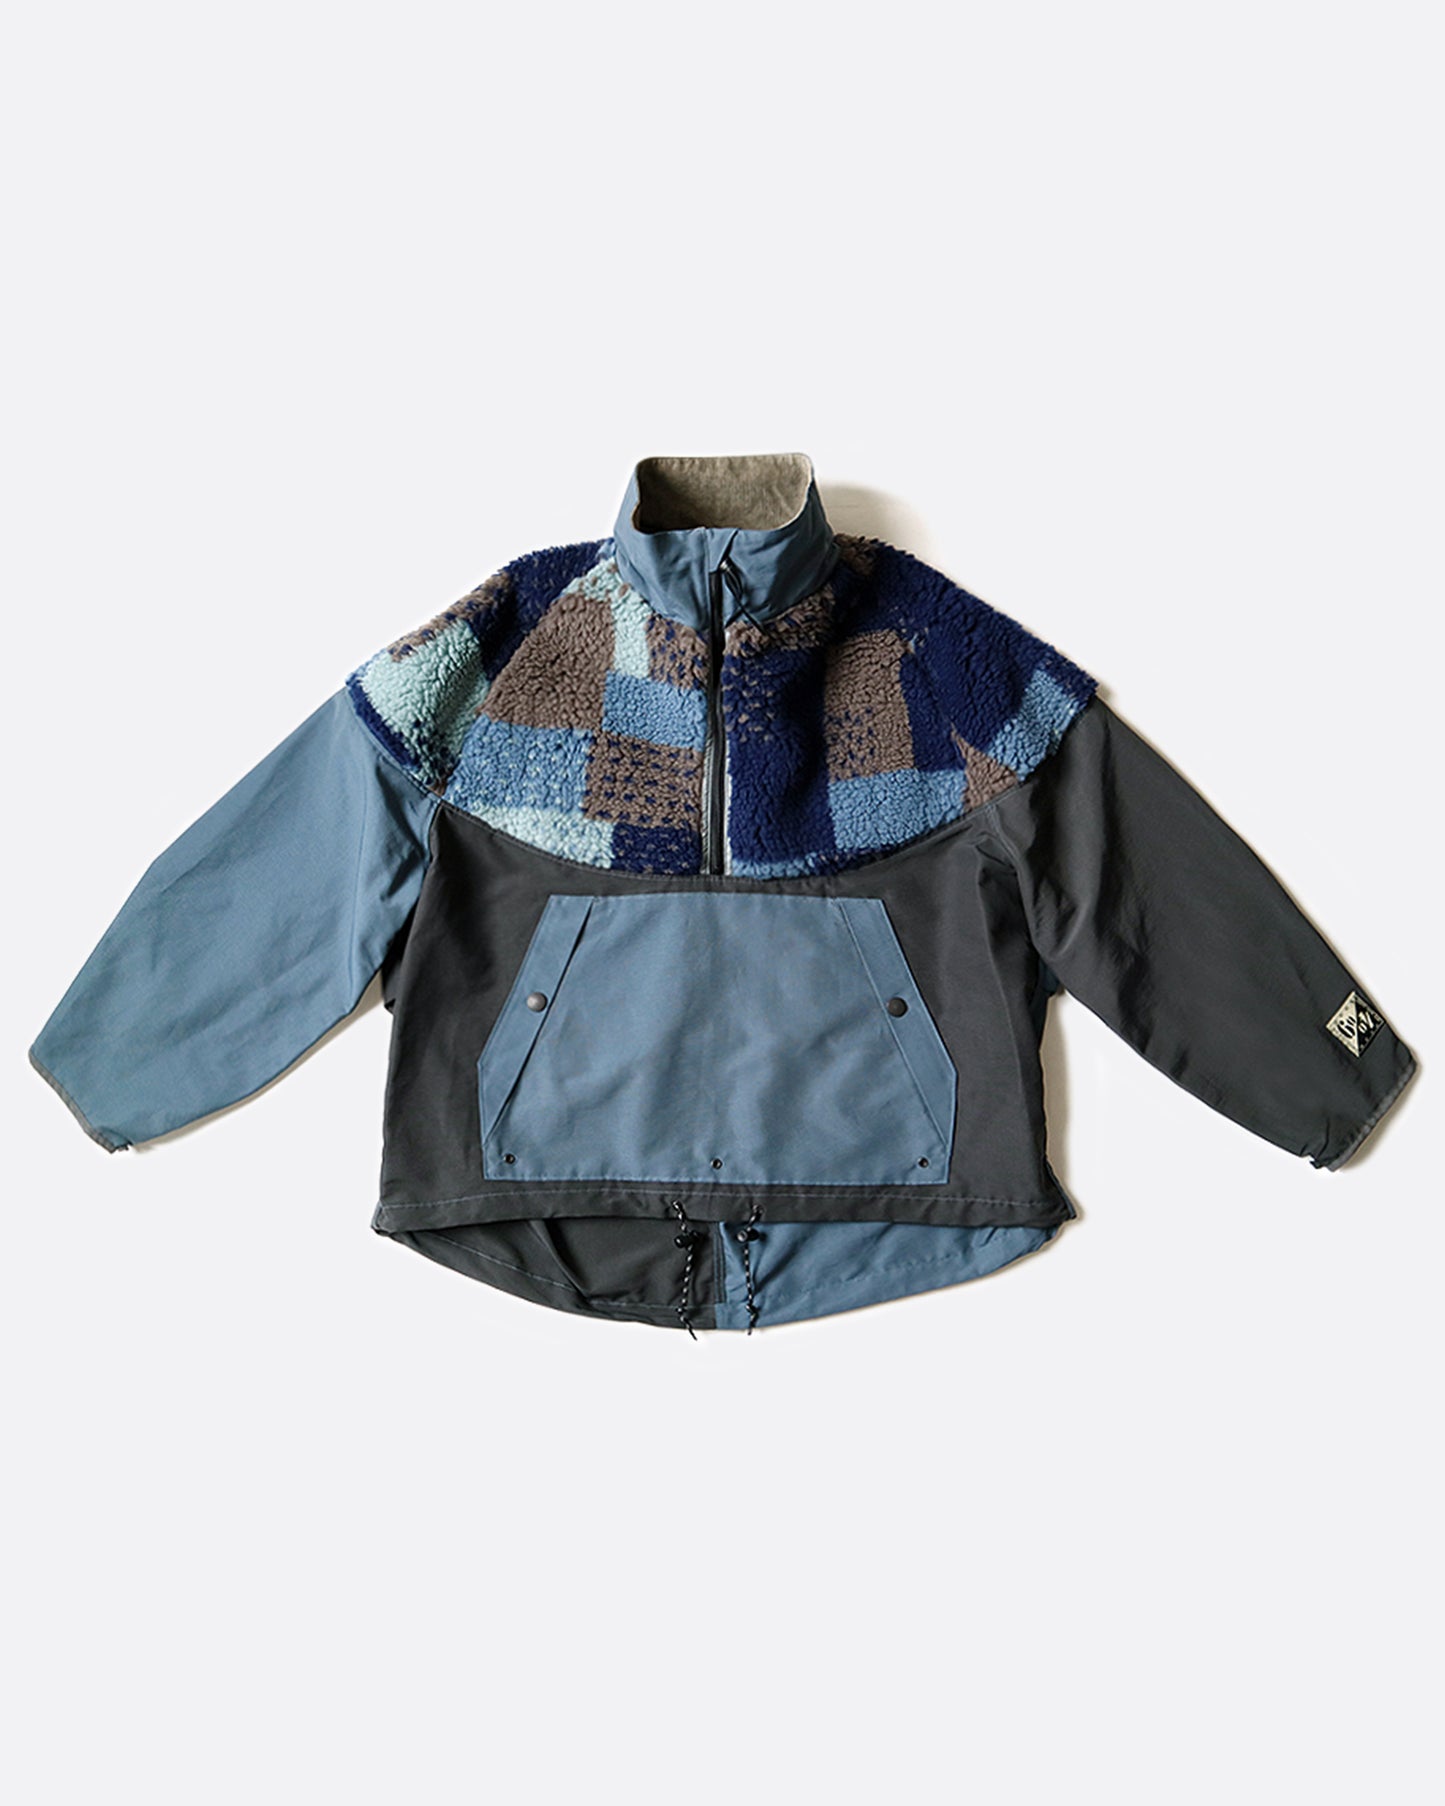 A pullover anorak with a half zip. Half blue and half gray with patchwork fleece around the shoulders. Shown laying flat.